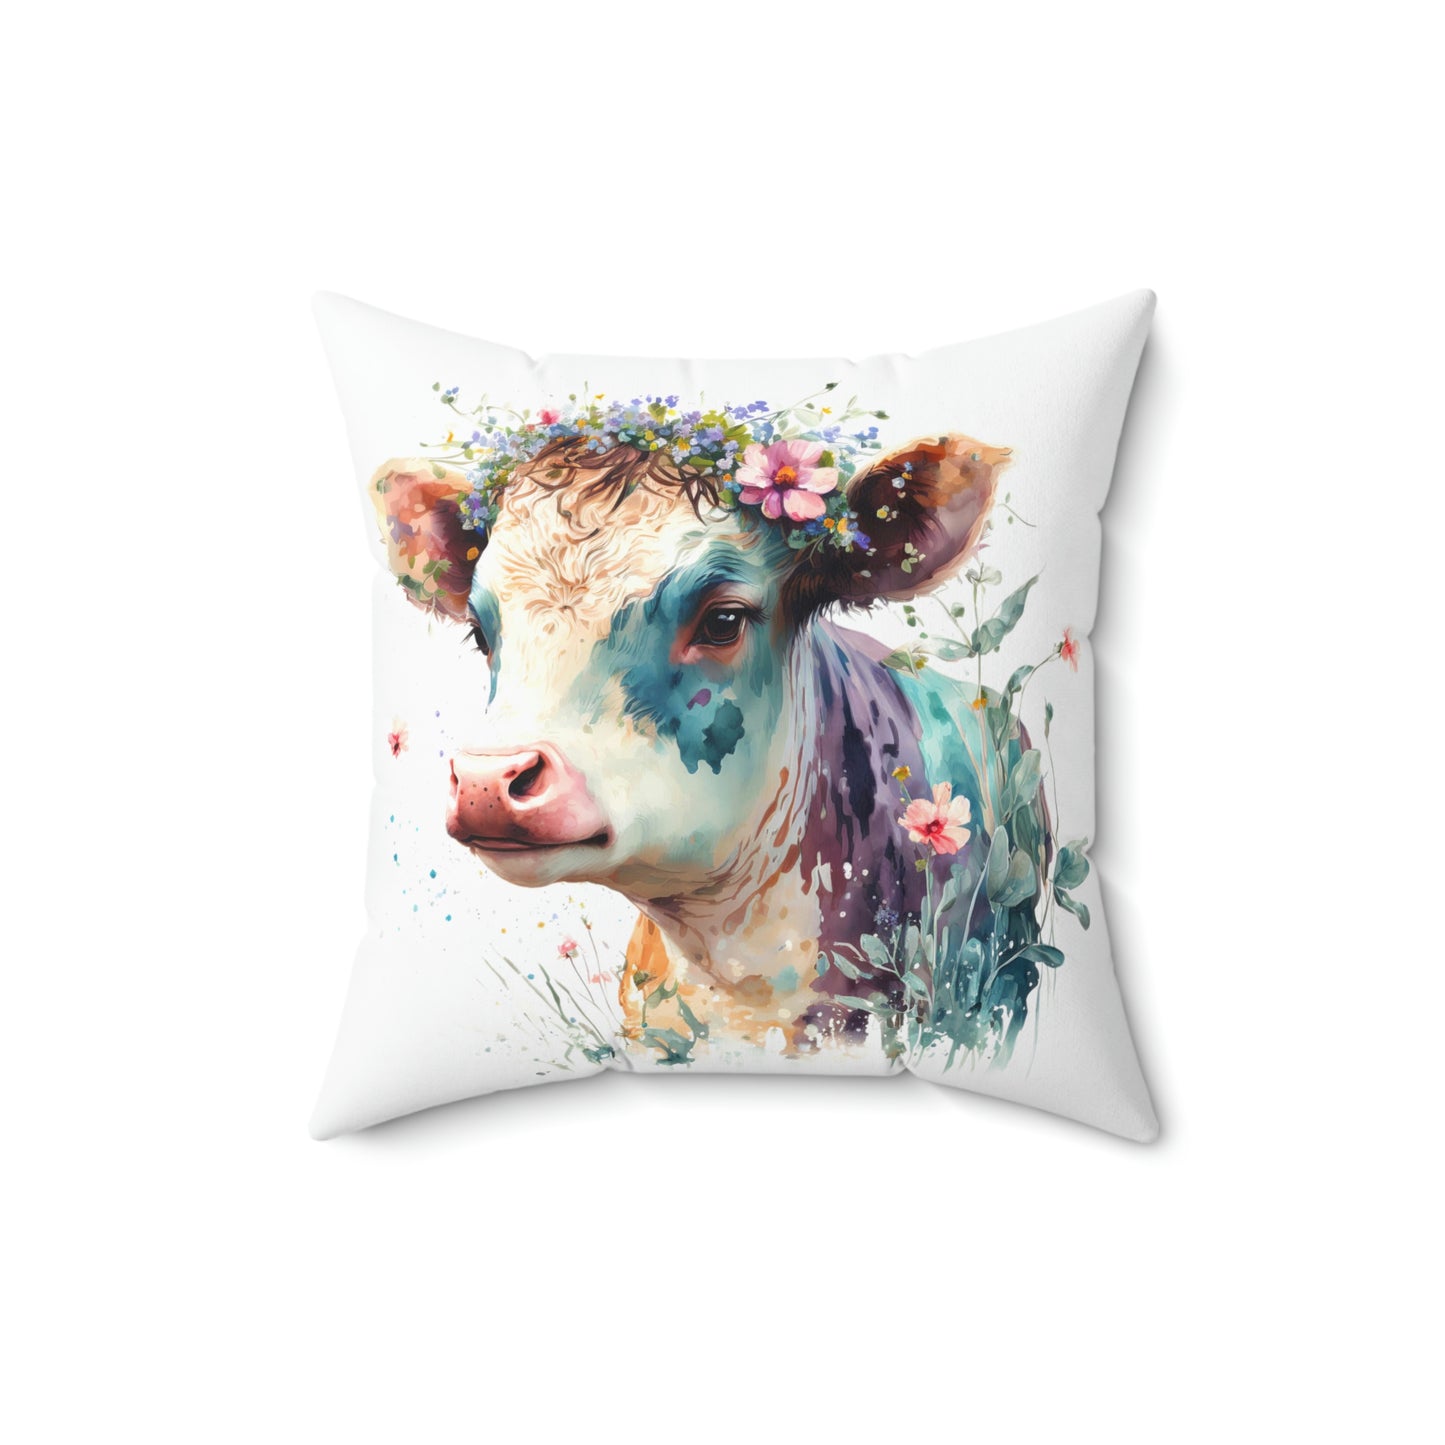 floral cow design accent pillow, cow accent throw pillow for your home decor, decorate your living room couch with a cow pattern throw pillow 